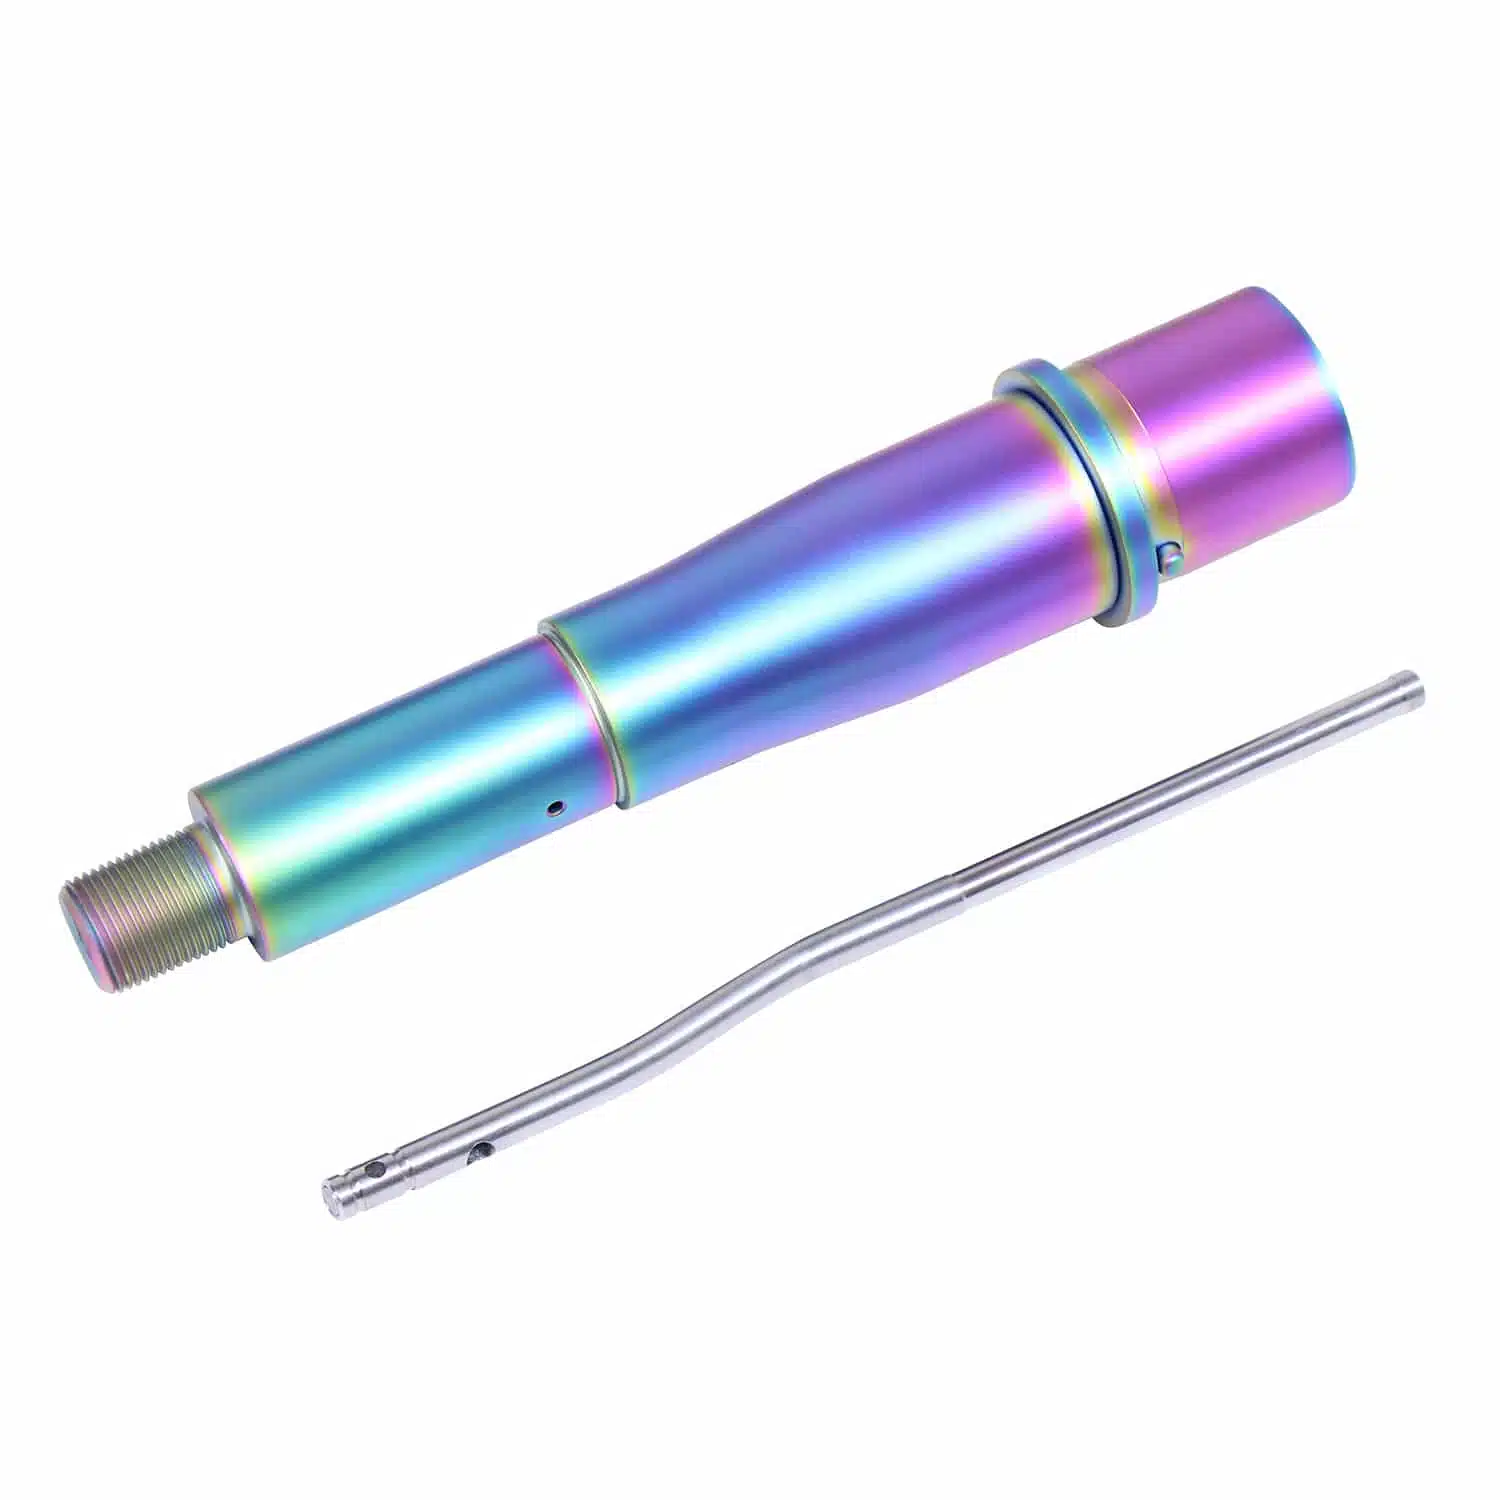 5" 5.56mm 1:5 Twist Barrel With Gas Tube in Rainbow PVD Coated